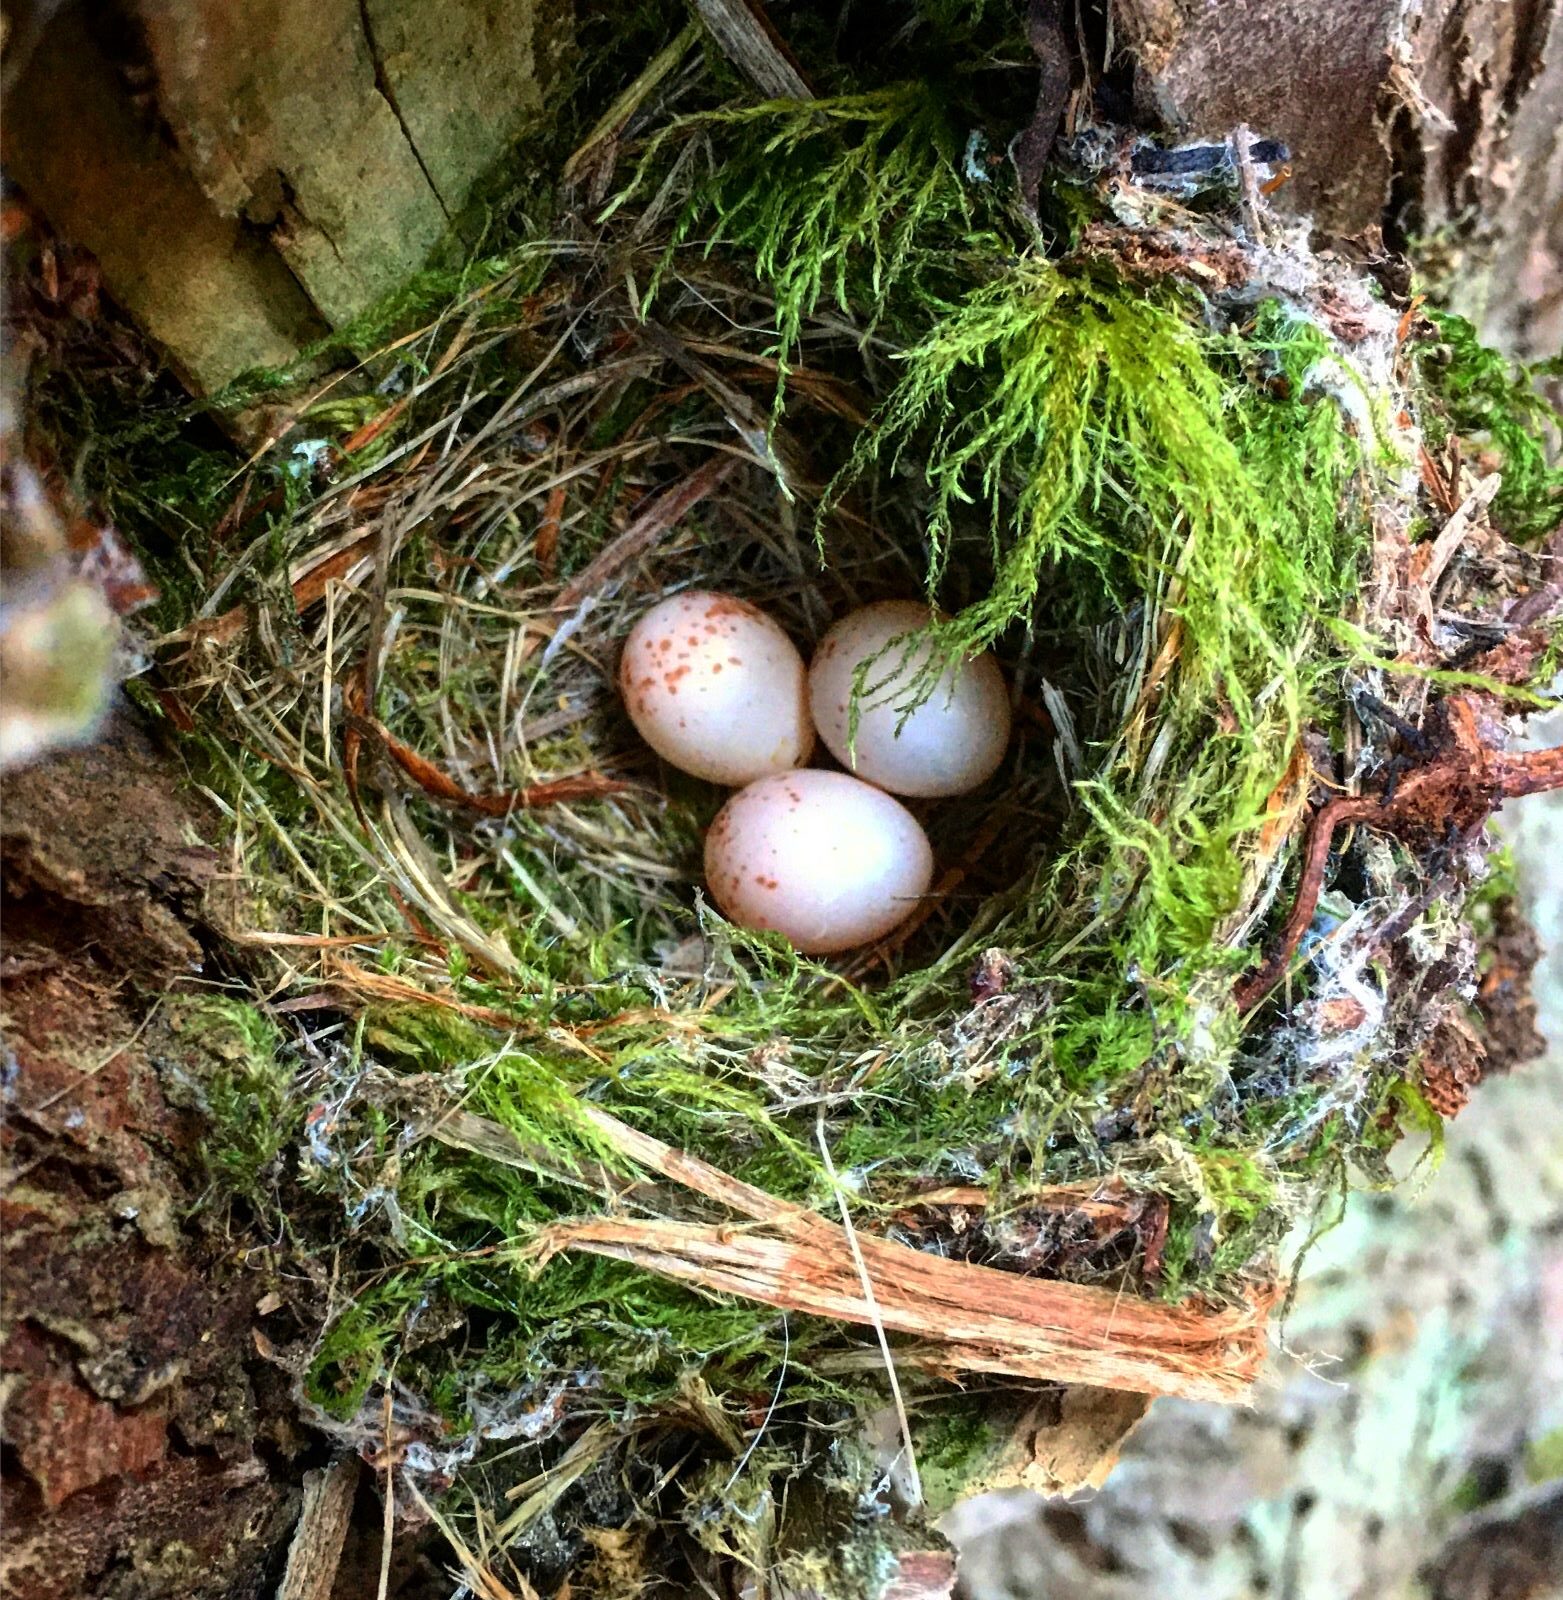 Three speckled eggs in a mossy nest in the crotch of a tree